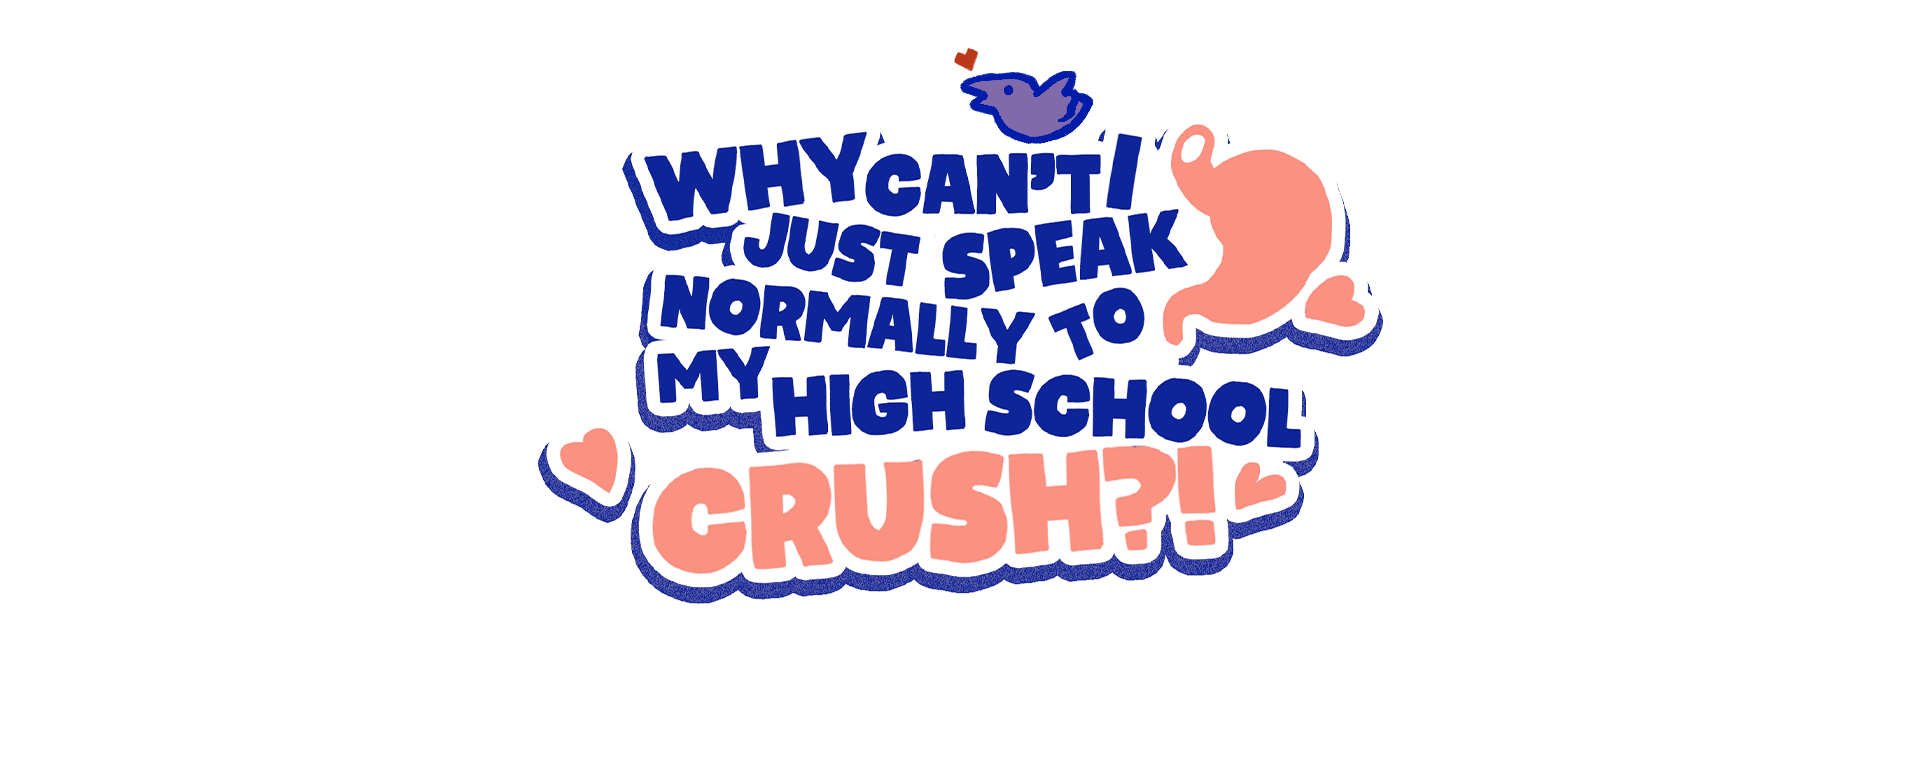 Why Can't I Just Speak Normally To My High School Crush?!